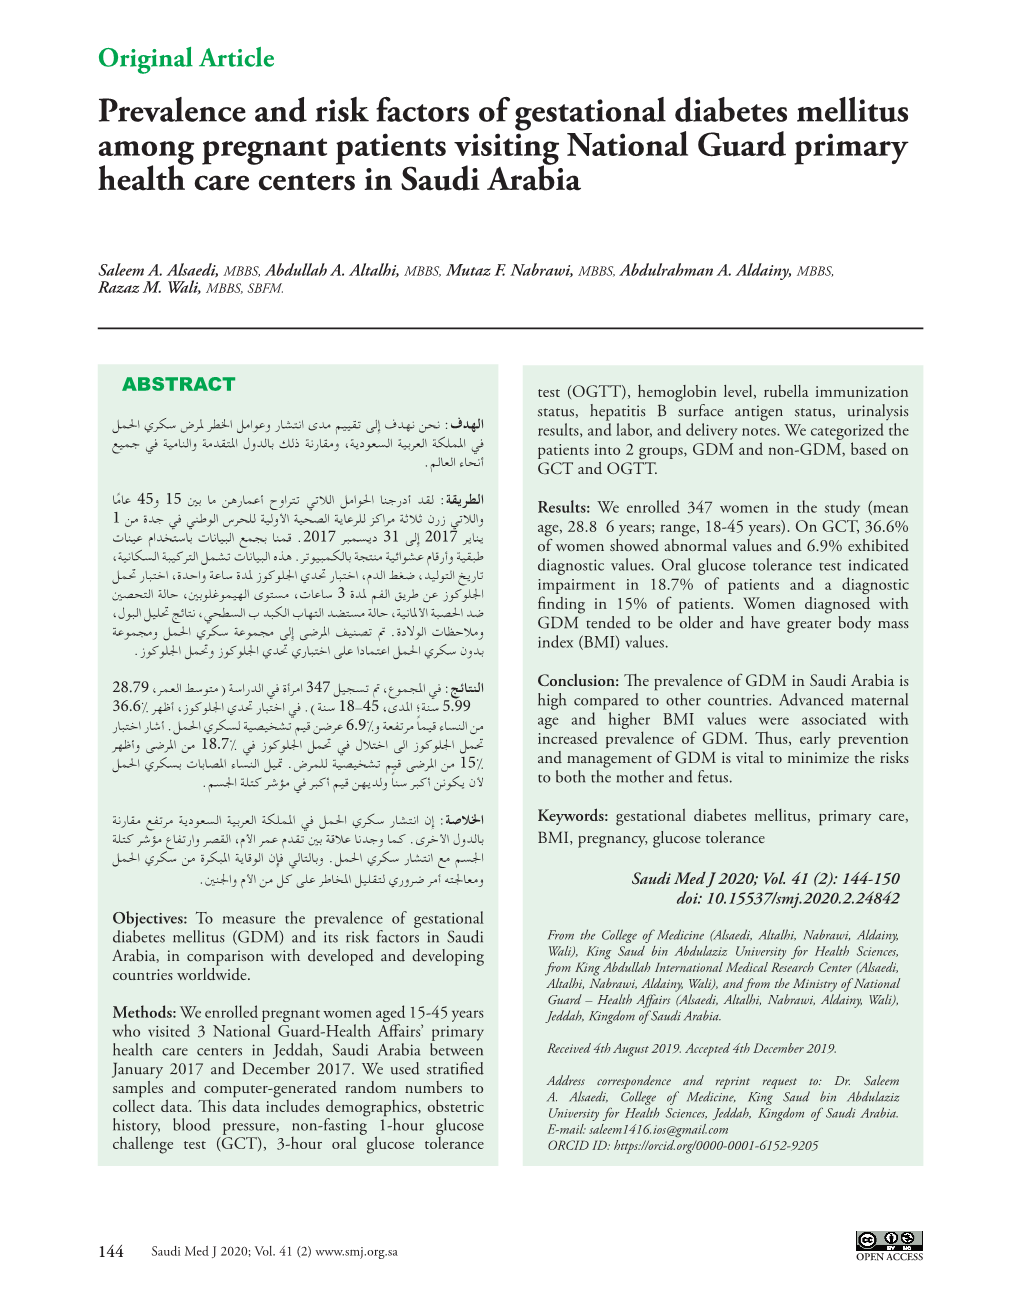 Prevalence and Risk Factors of Gestational Diabetes Mellitus Among Pregnant Patients Visiting National Guard Primary Health Care Centers in Saudi Arabia